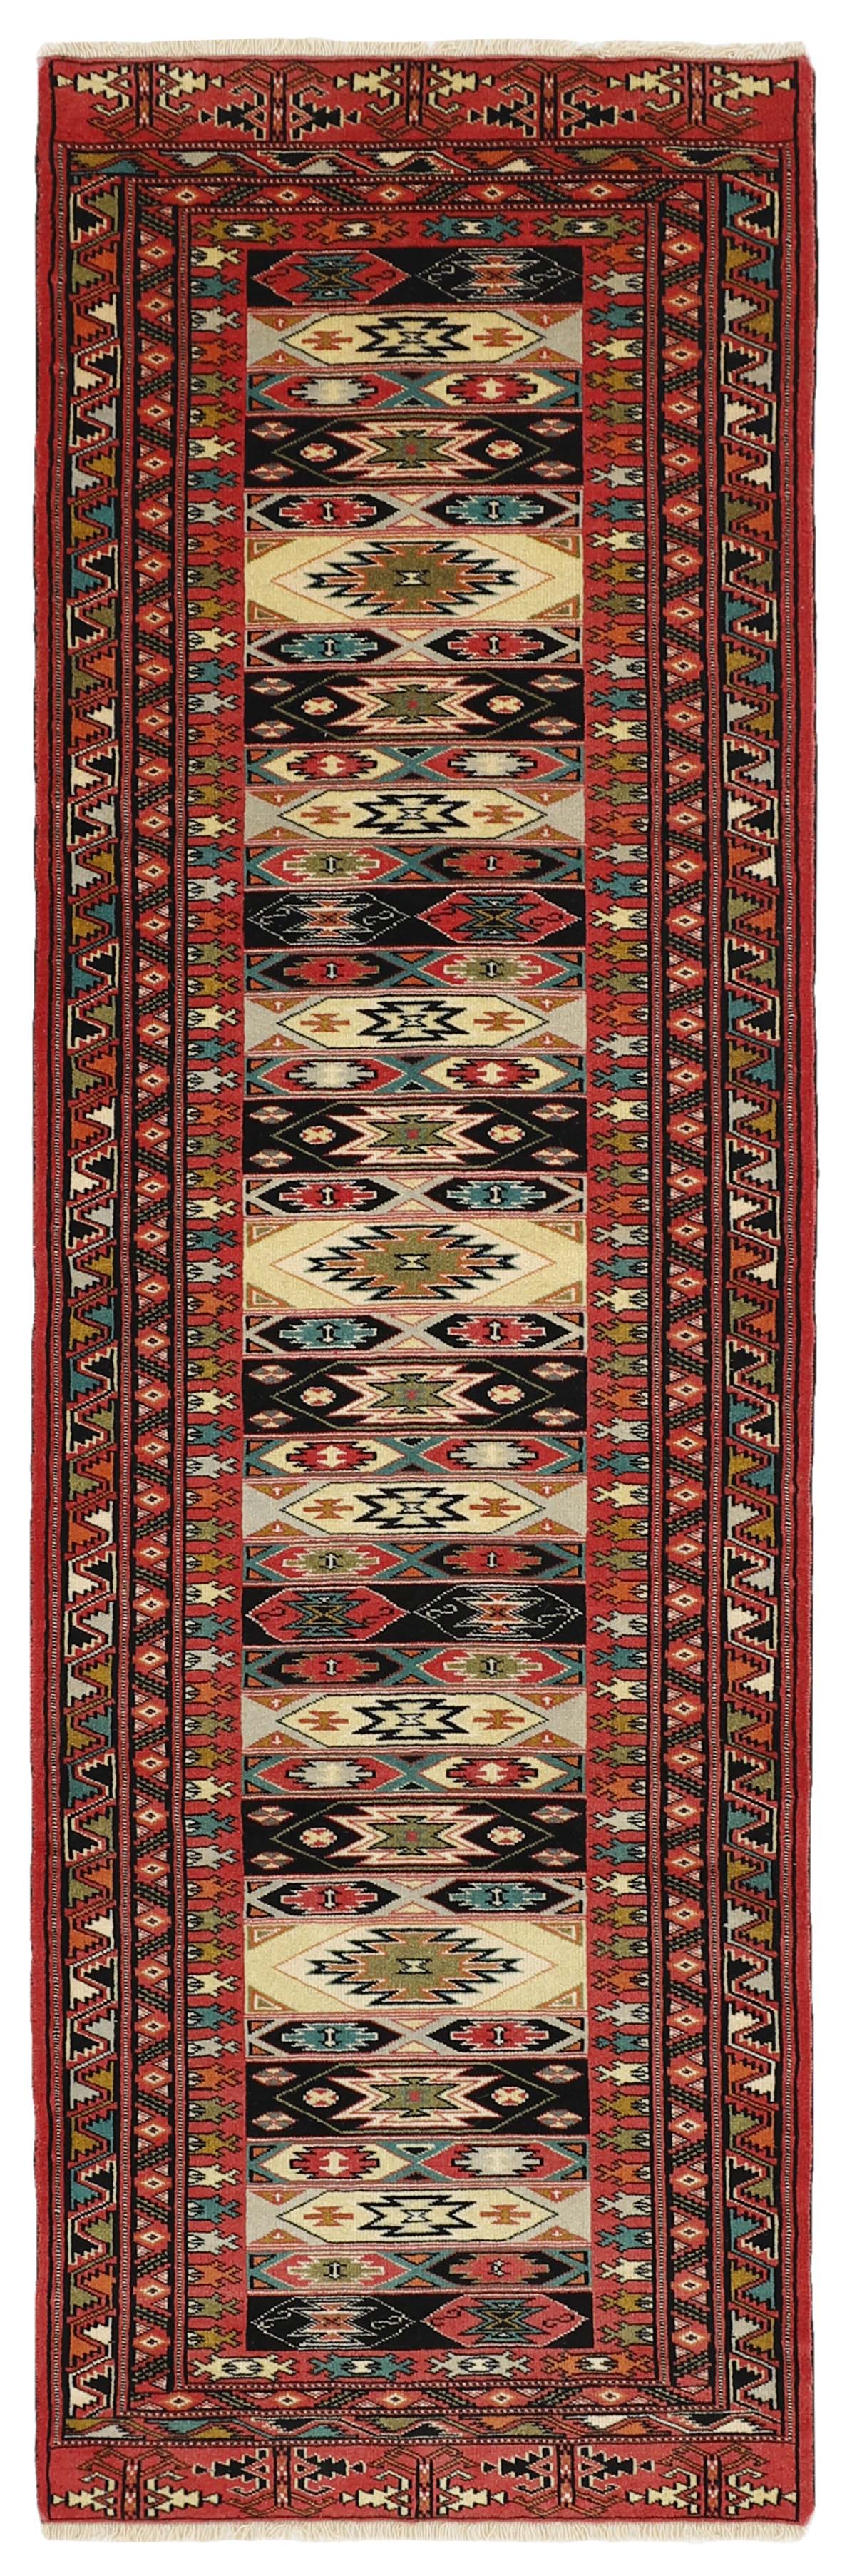 authentic blue, red and black persian runner